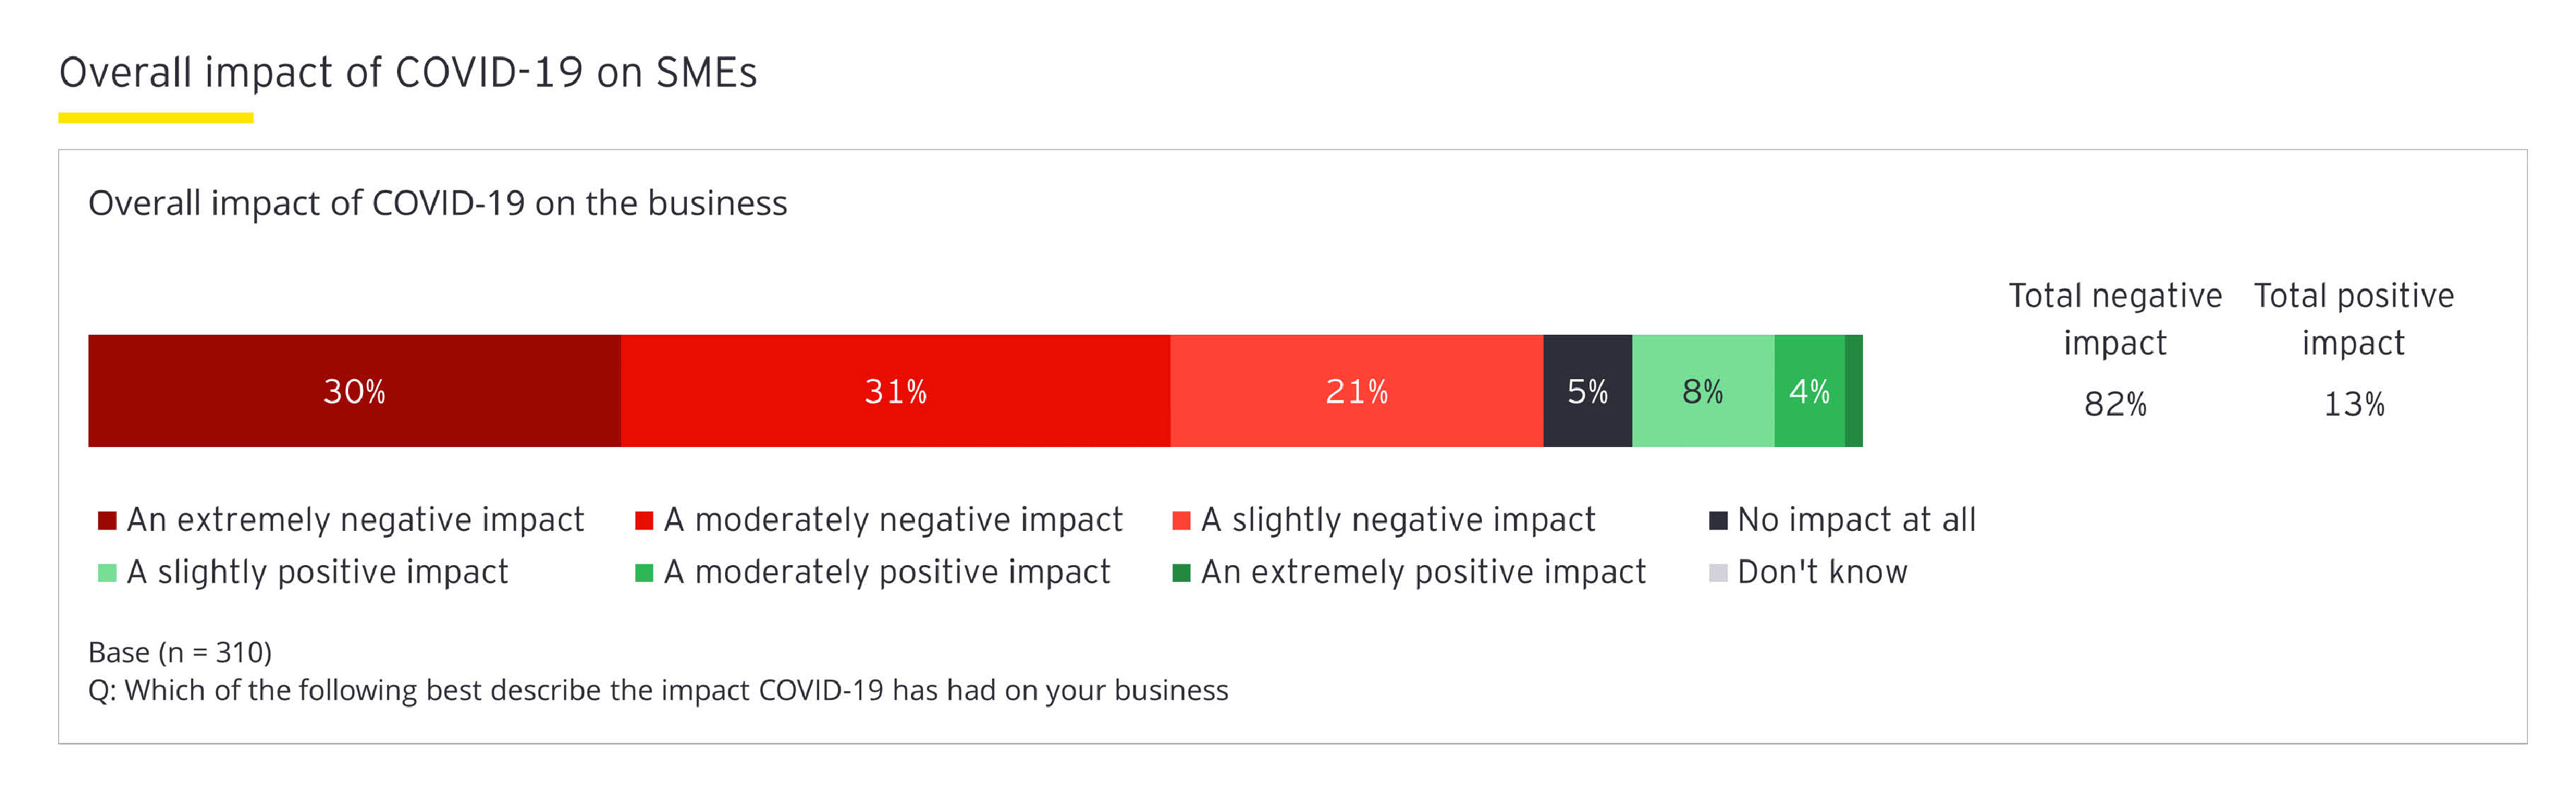 Overall impact of COVID-19 on SMEs